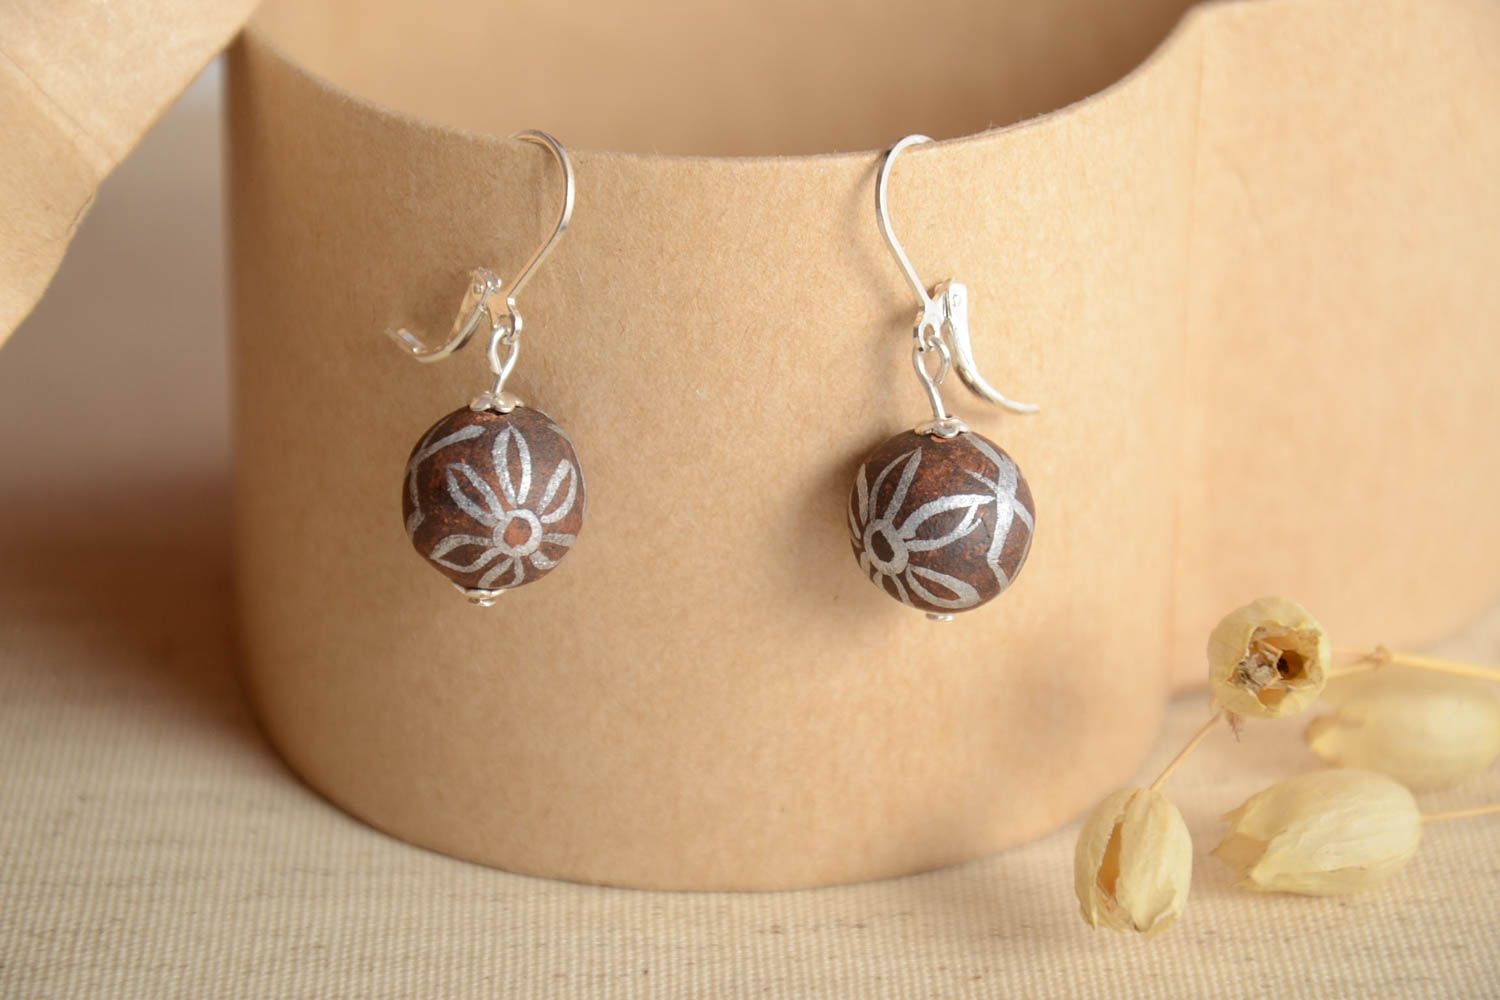 Stylish handmade ceramic ball earrings painted clay earrings gifts for her photo 1